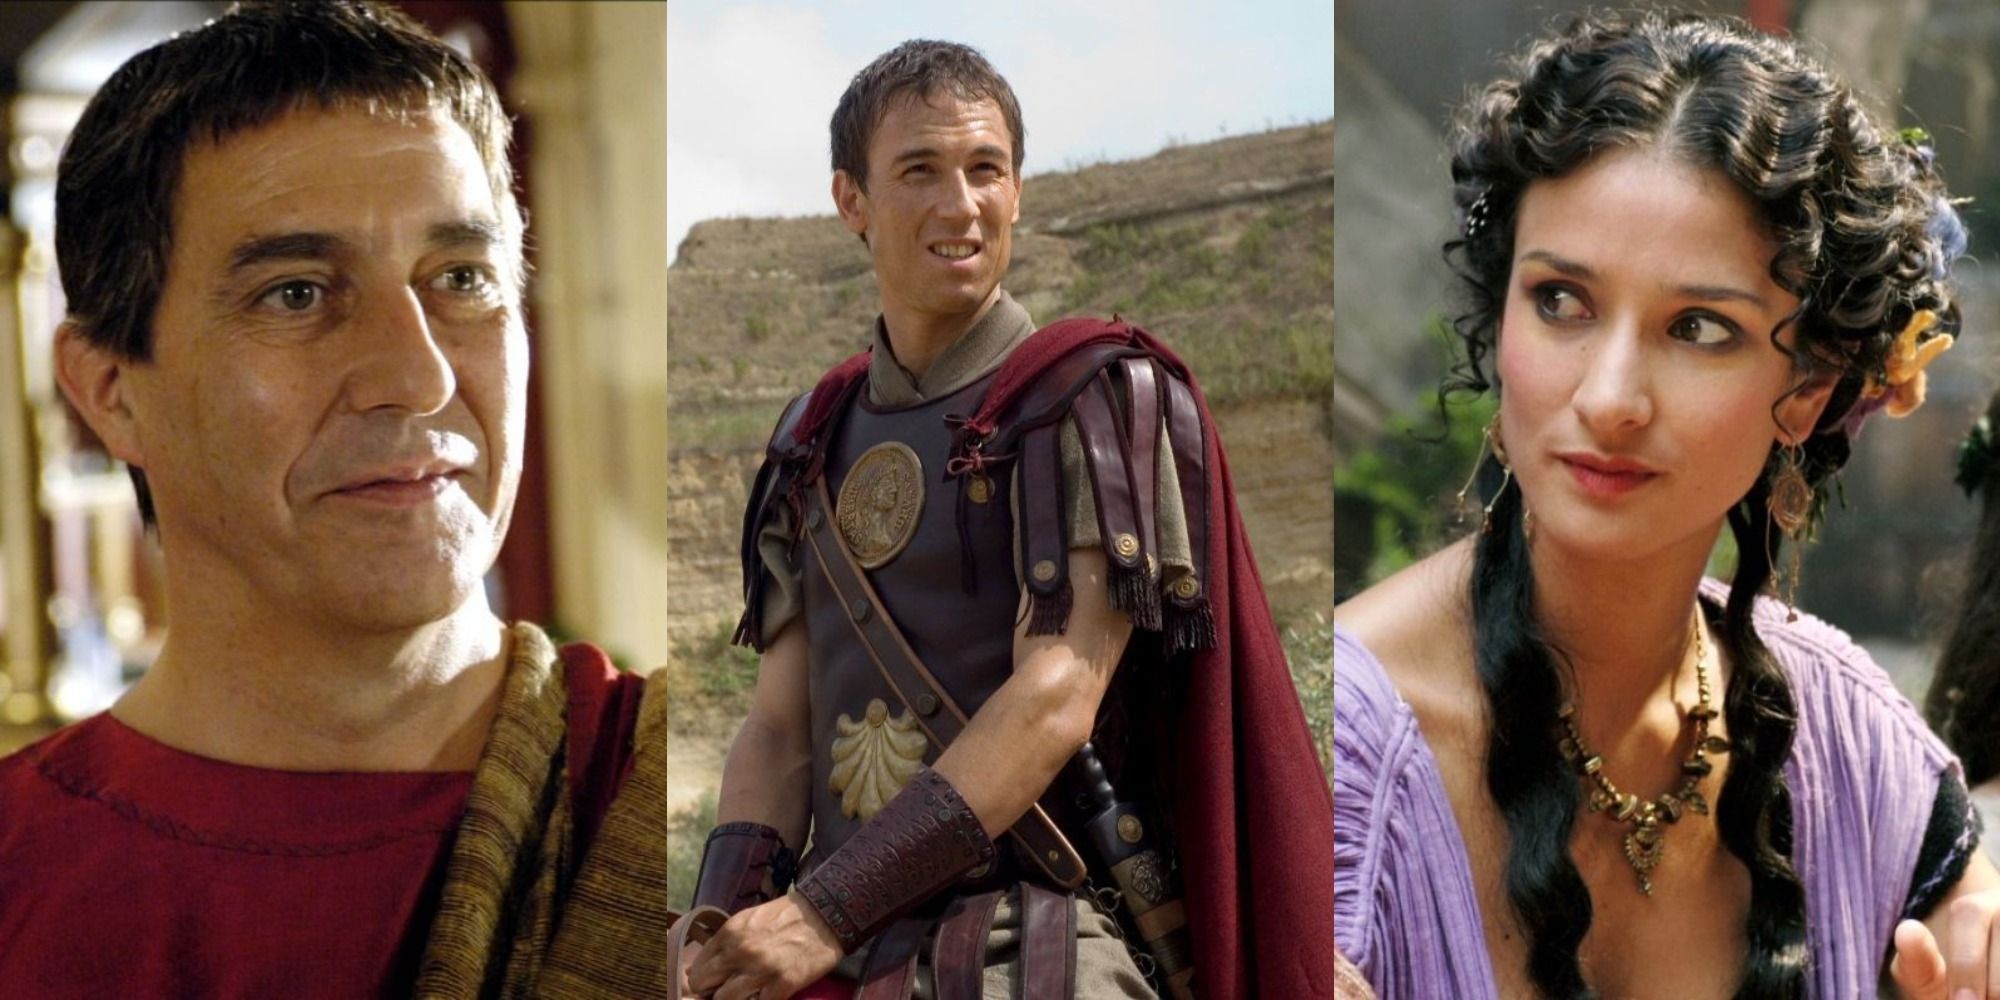 Split image of Ciarán Hinds, Tobias Menzies and Indira Varma in HBO Rome